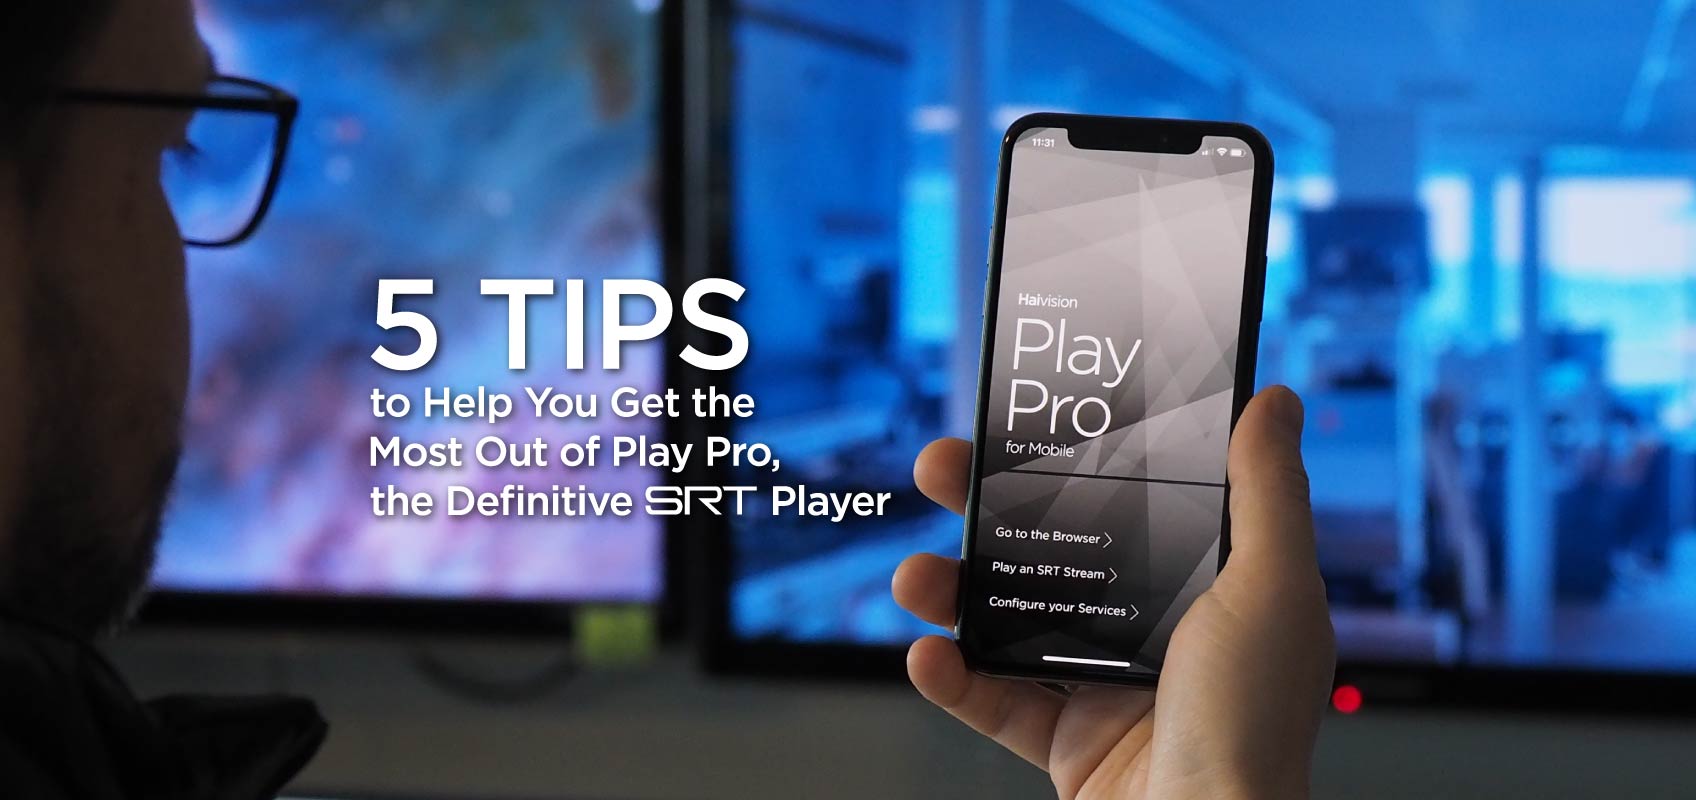 How To Be a Pro Gamer 5 Tips To Help You Get There